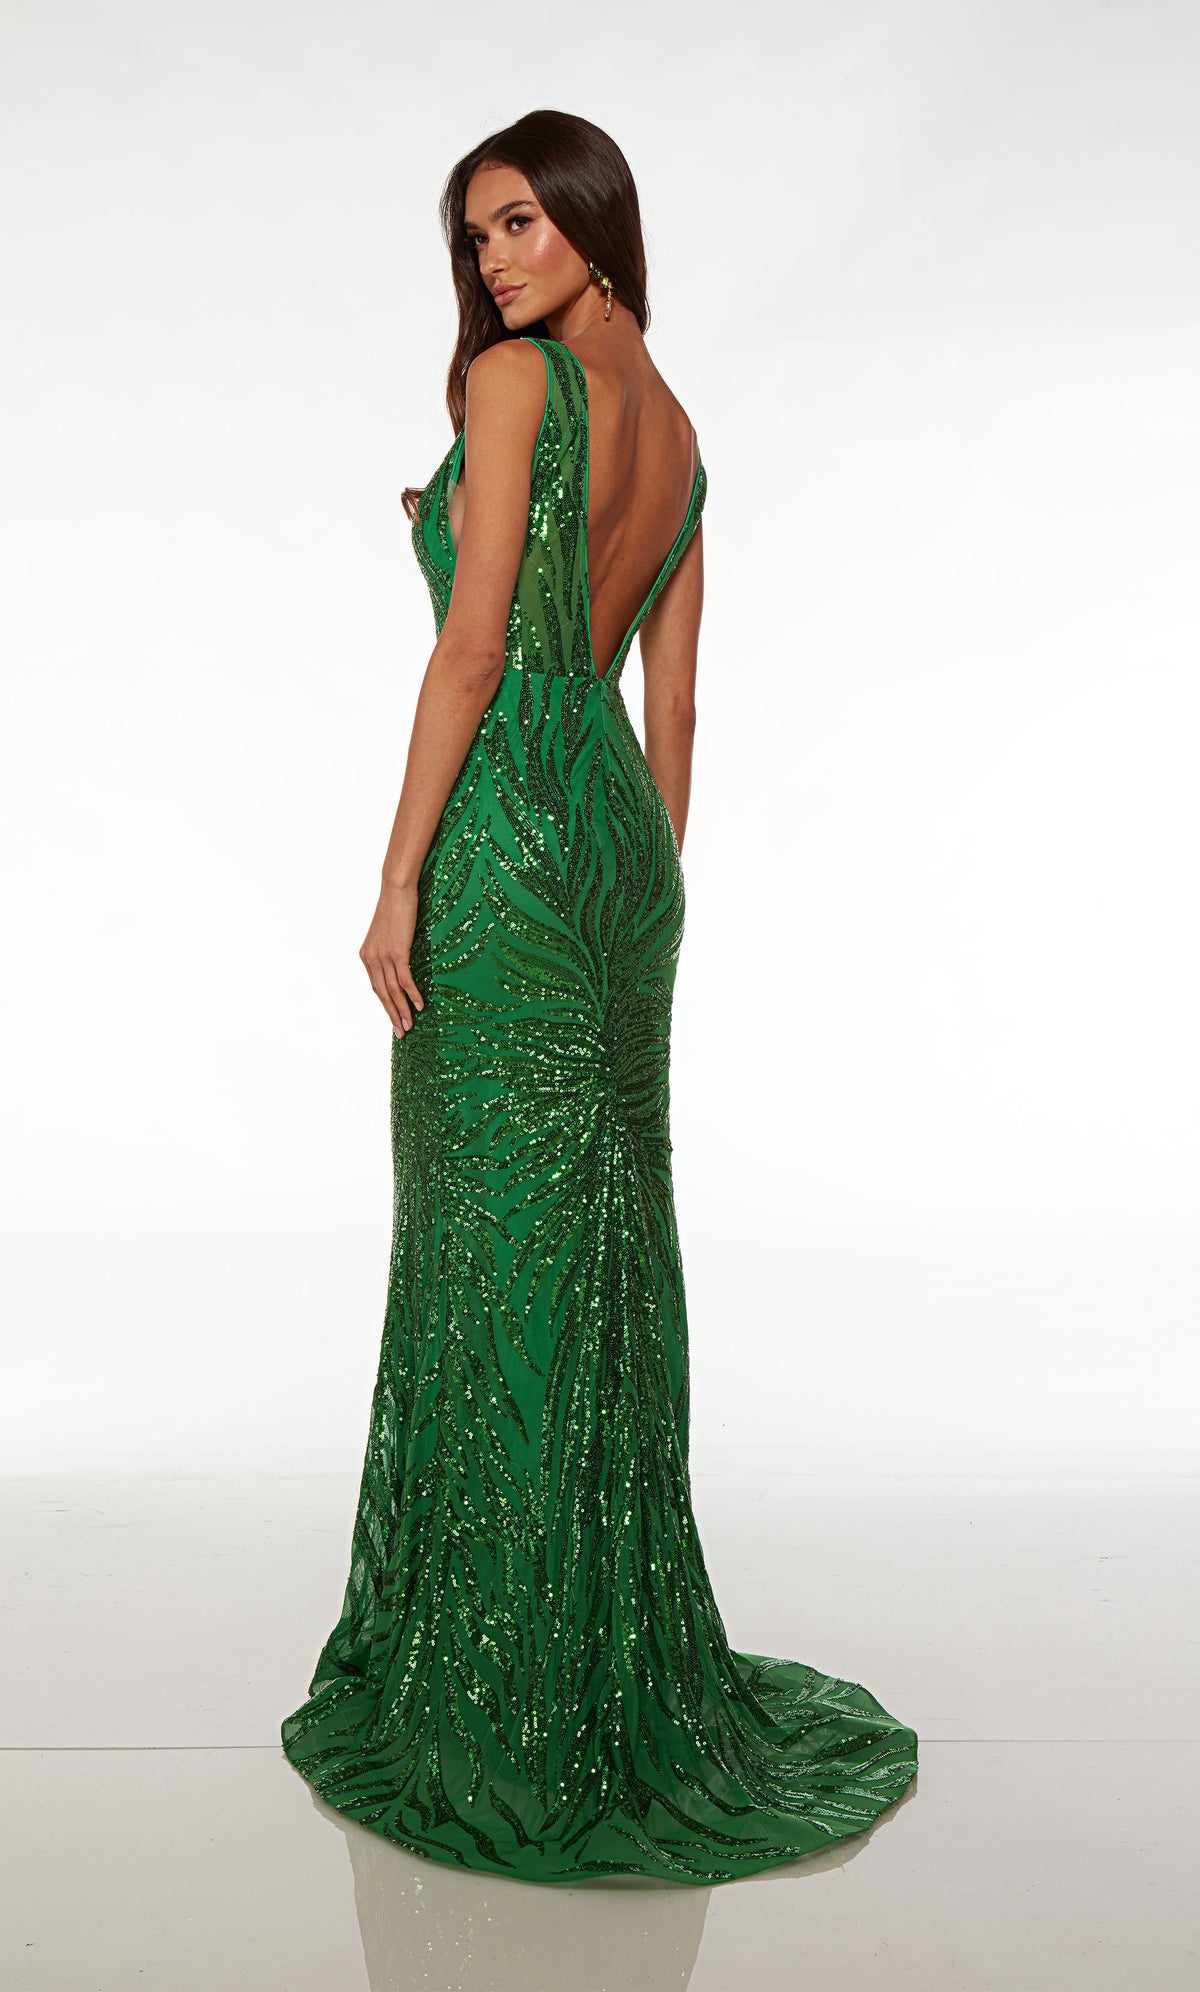 Fit-and-flare green prom dress with an low V neckline, V-shaped back, slight train, and an unique sequin design throughout for an stylish and sophisticated look.